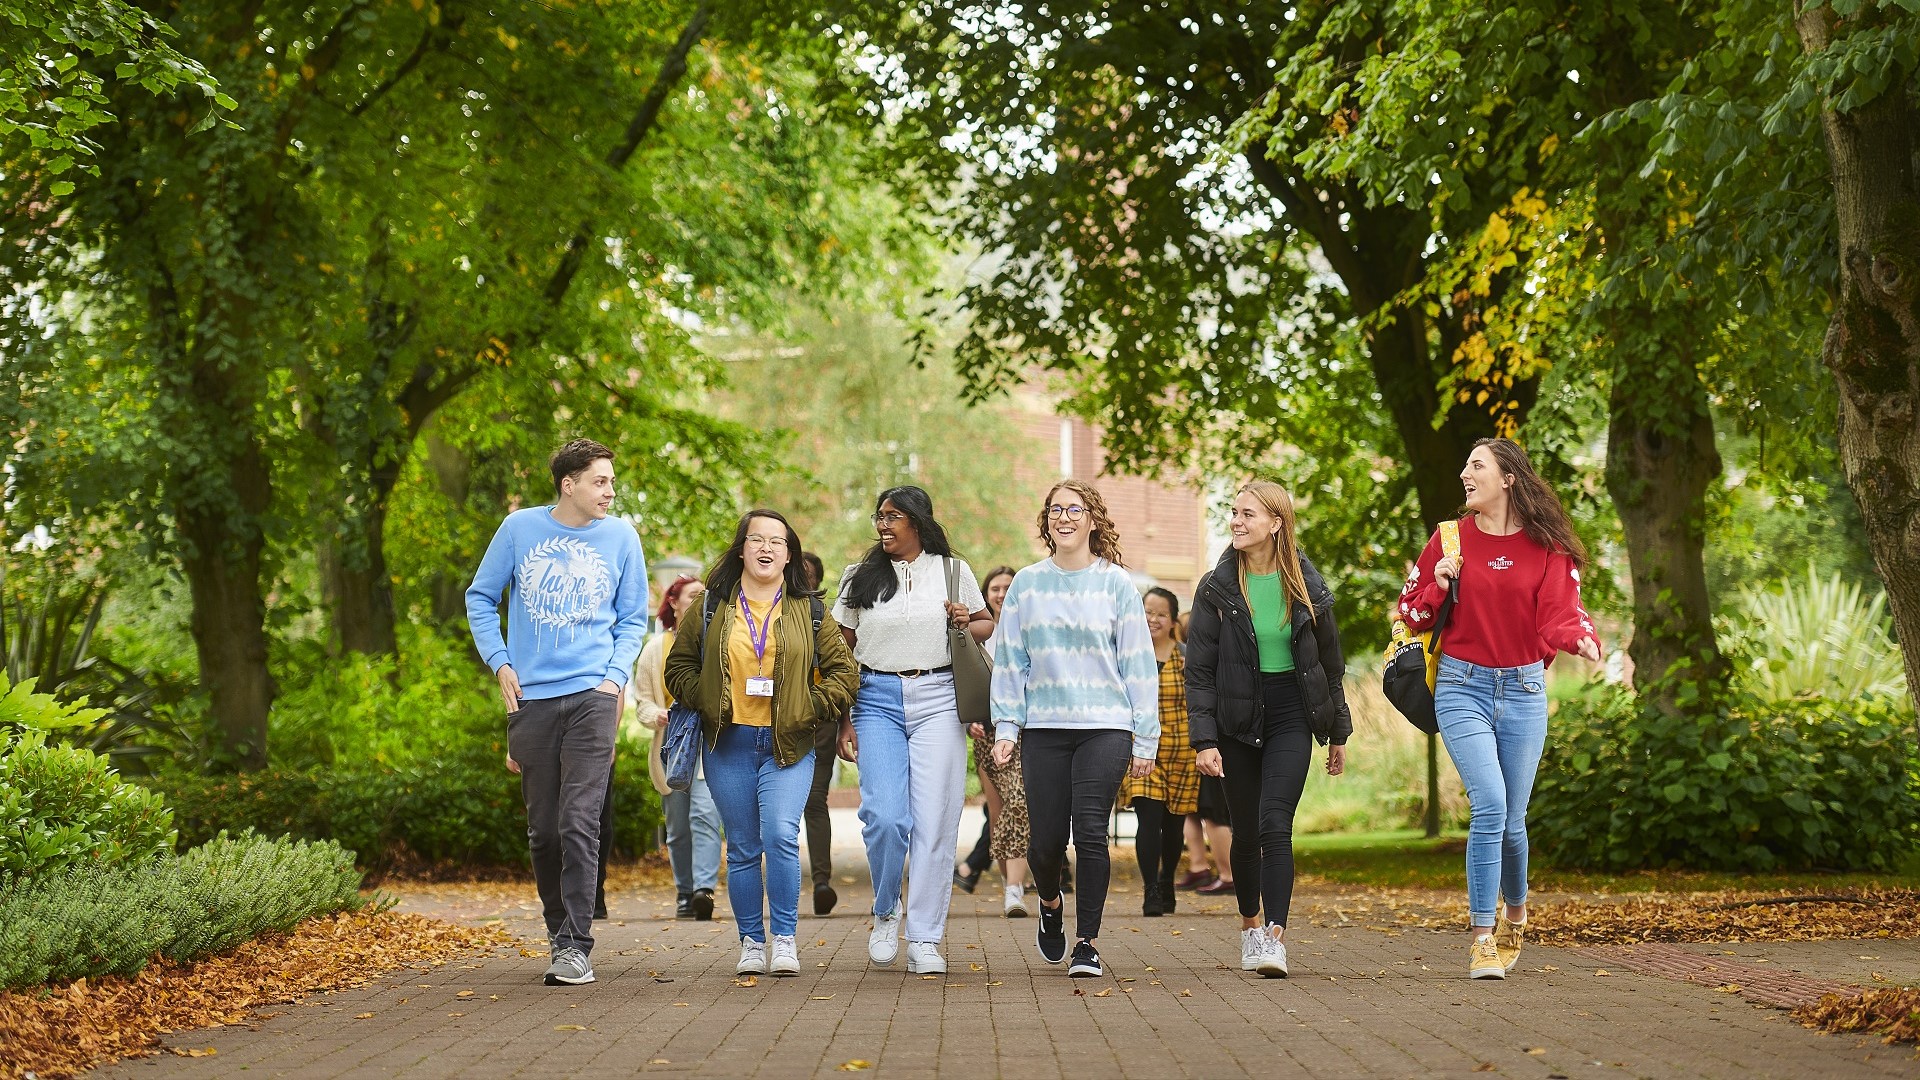 A group of students walk side by side through a green leafy avenue on campus.